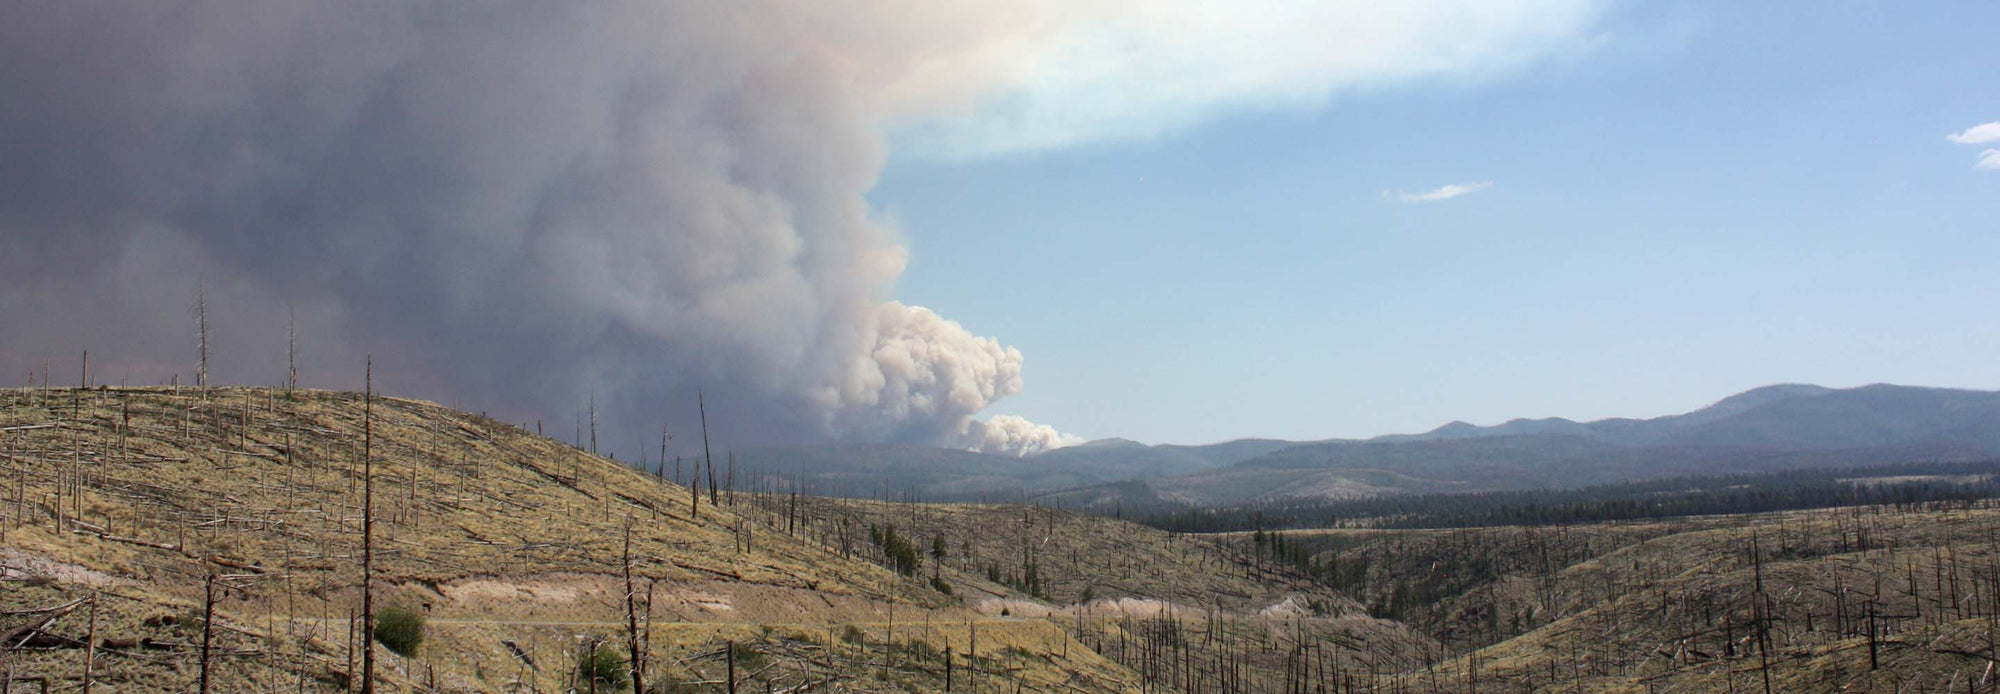 Smoke rises in the New Mexico wilderness